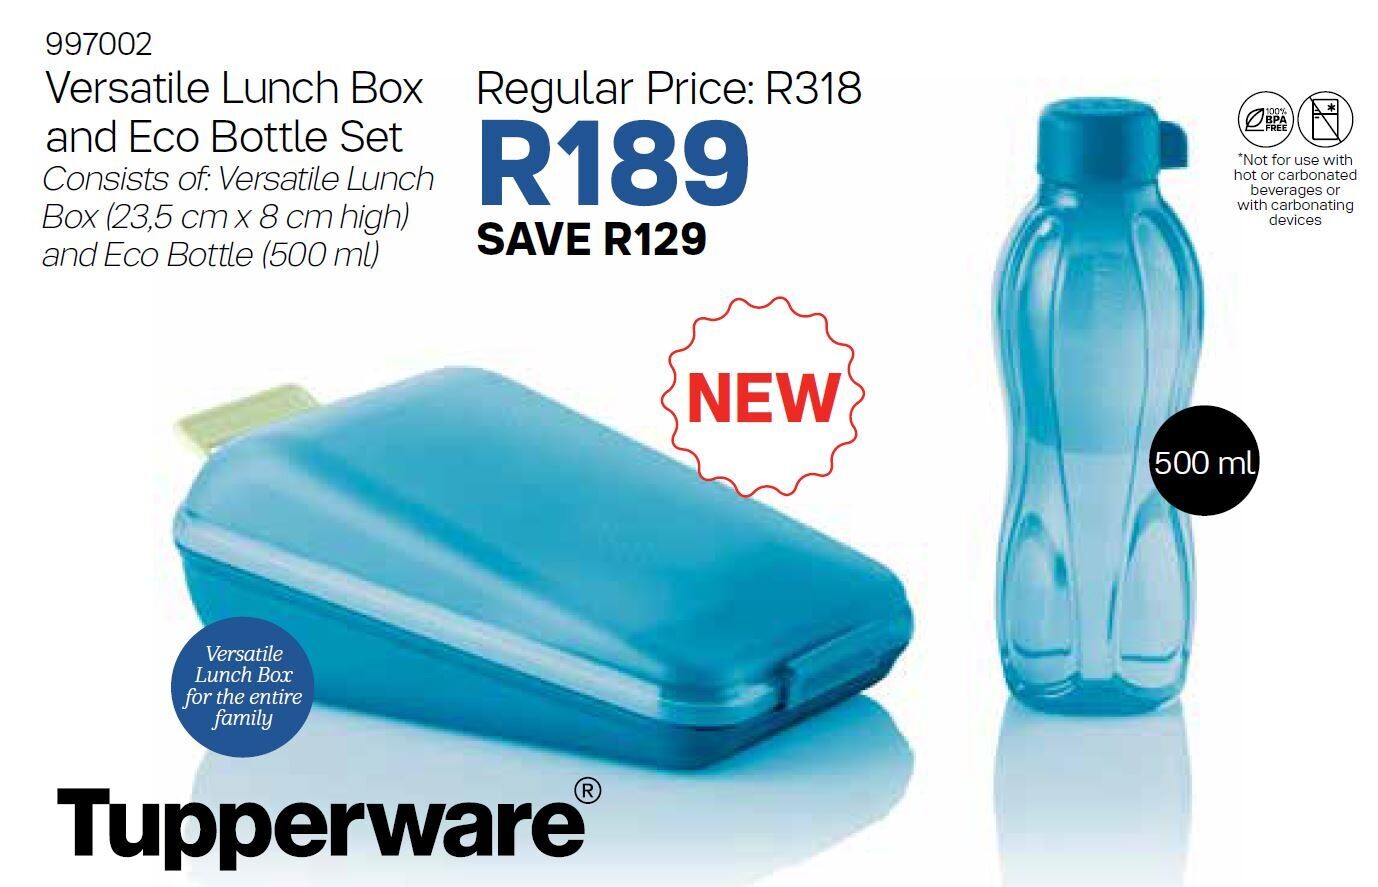 Versatile Lunch Box and Eco Bottle (500ml) Set